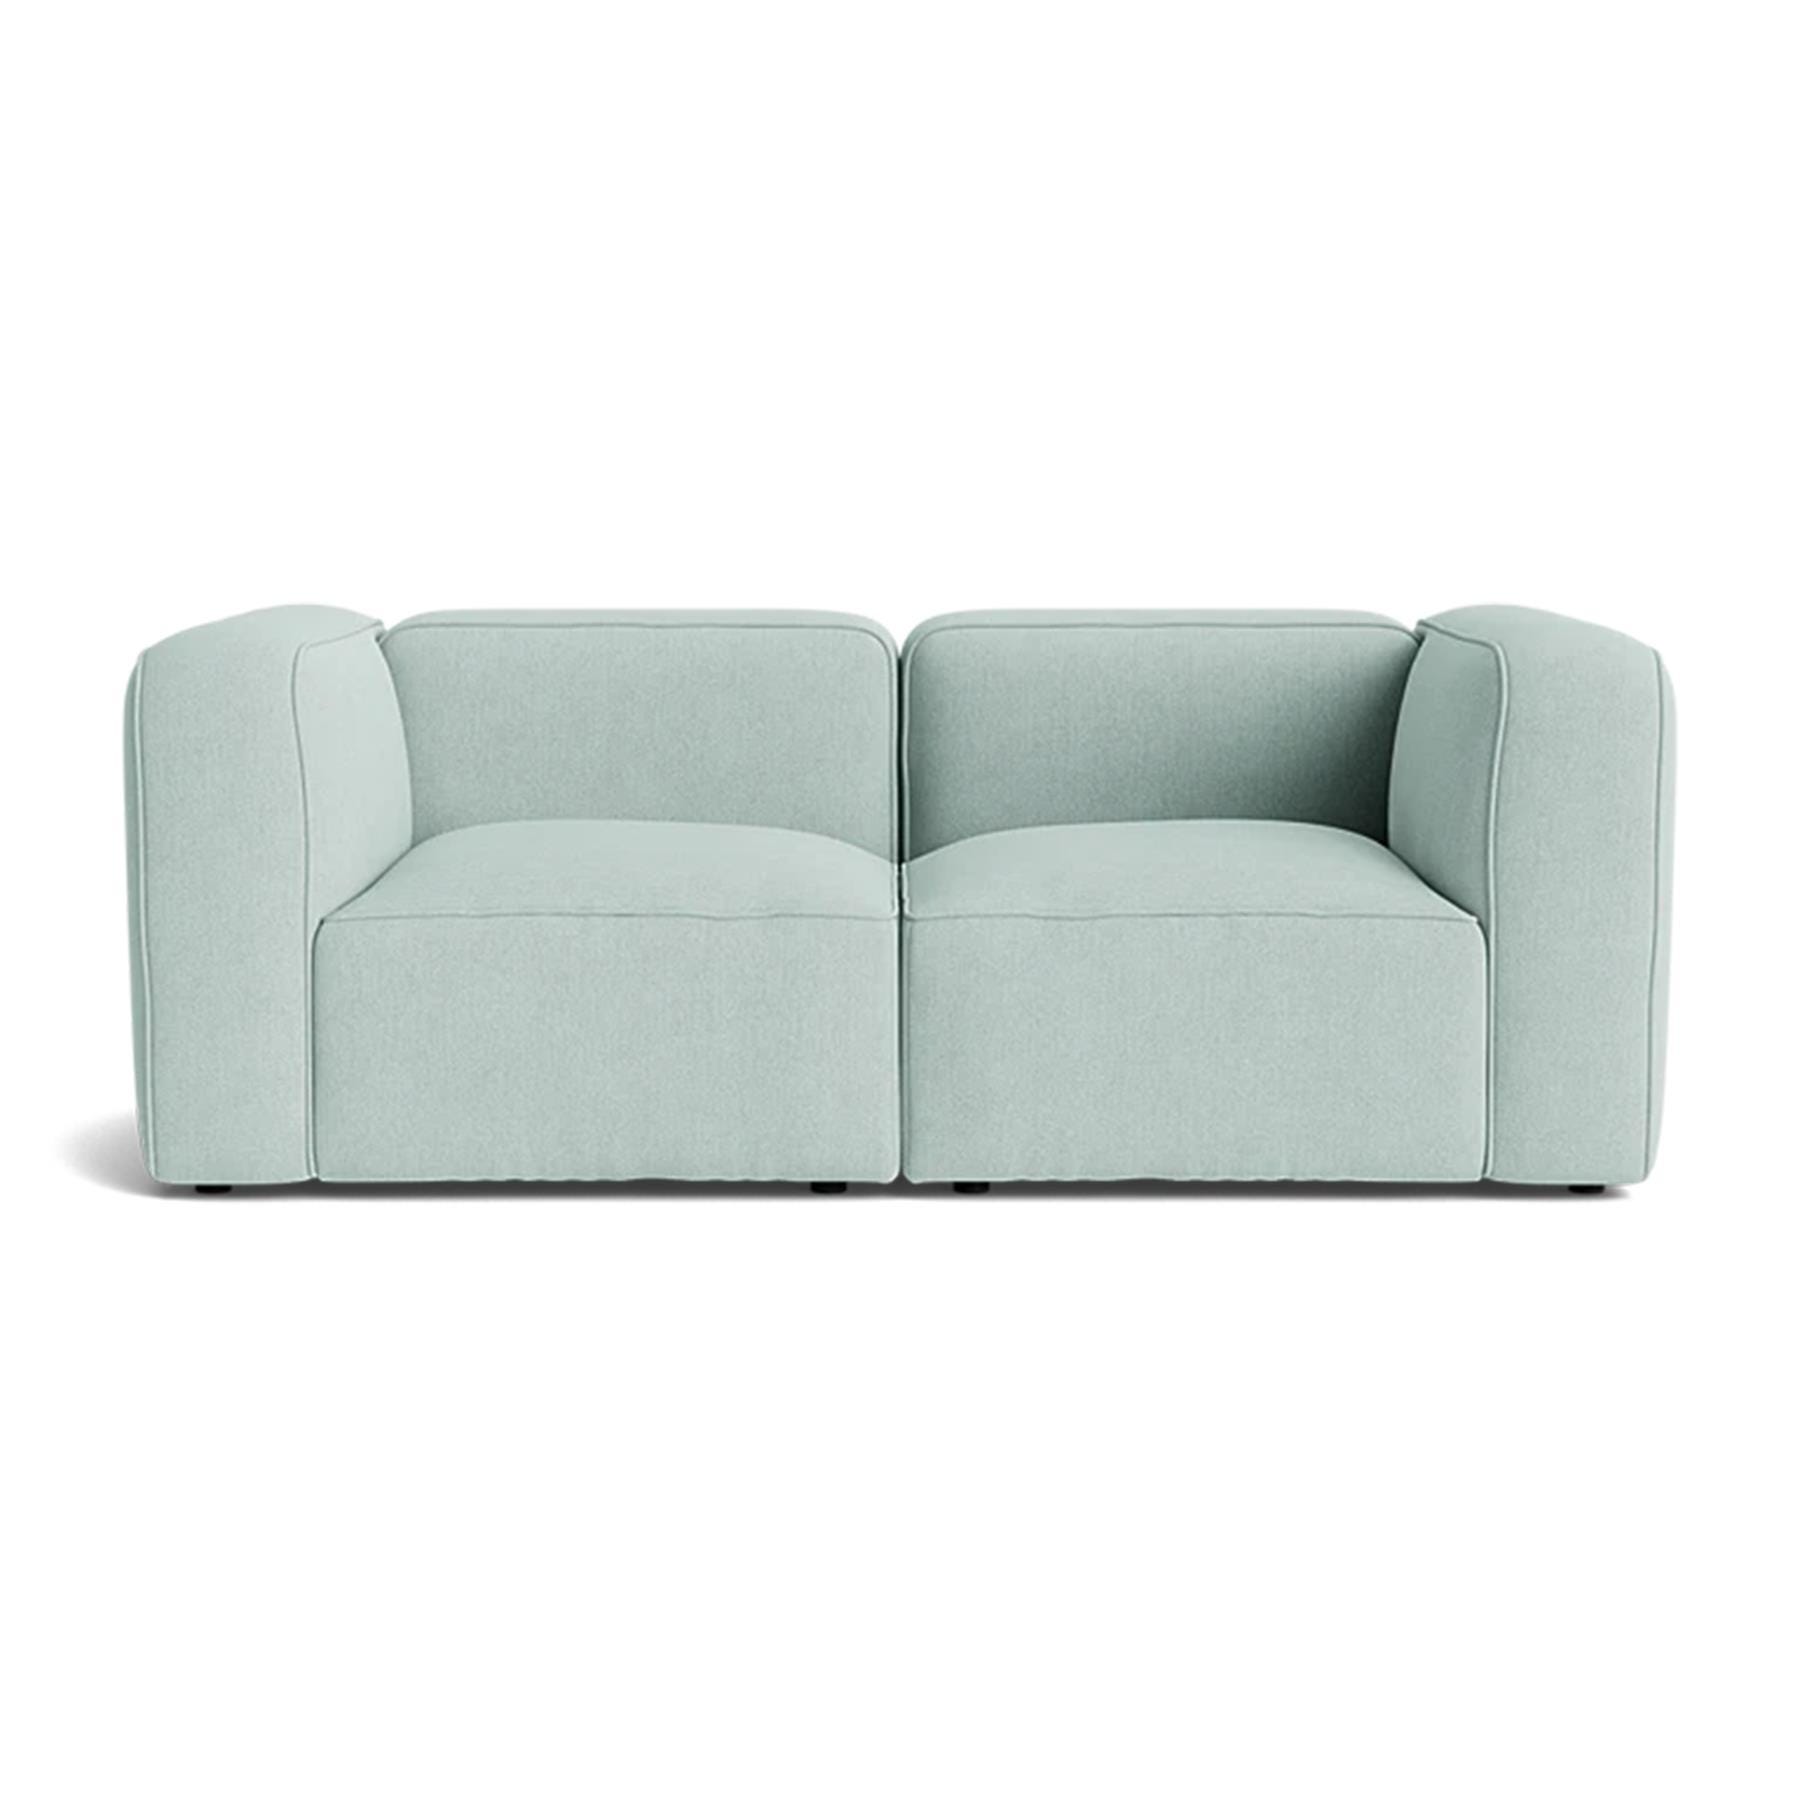 Make Nordic Basecamp 2 Seater Sofa Fiord 721 Blue Designer Furniture From Holloways Of Ludlow